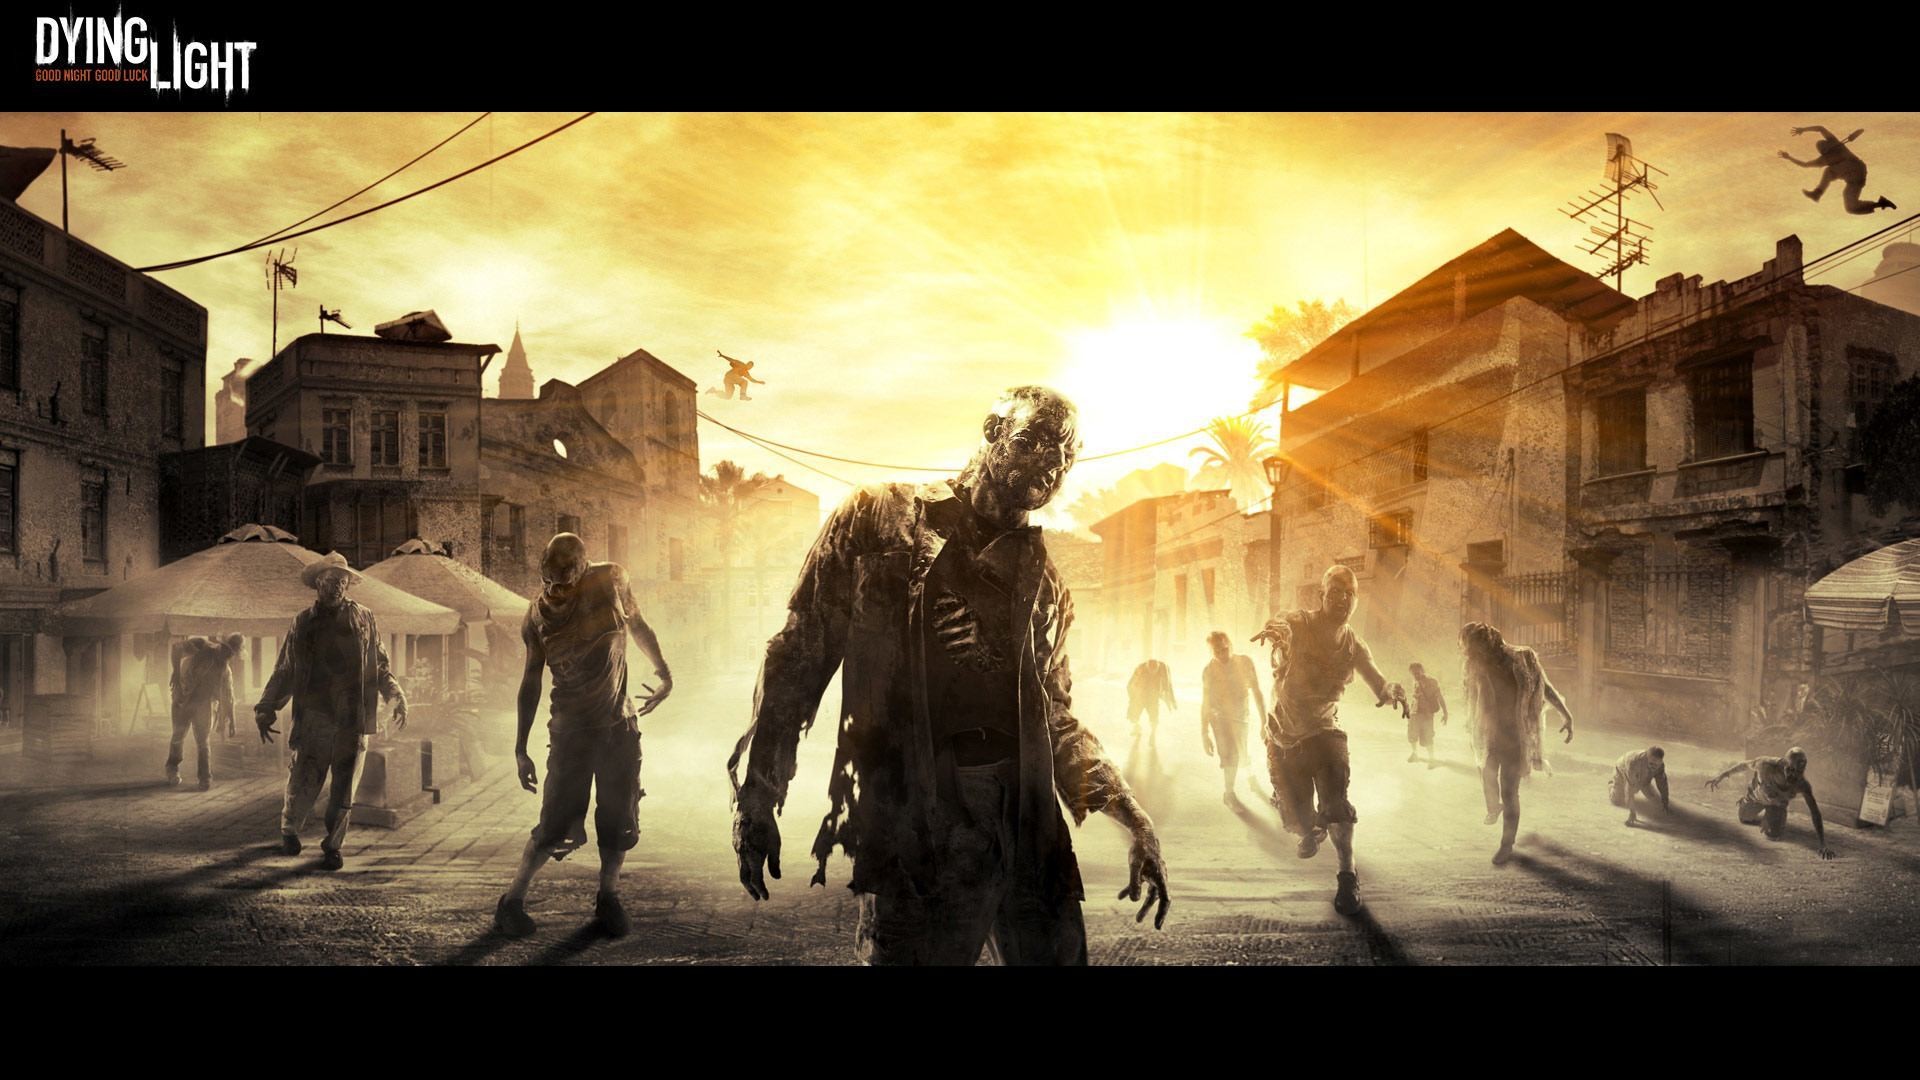 Dying Light Wallpapers.